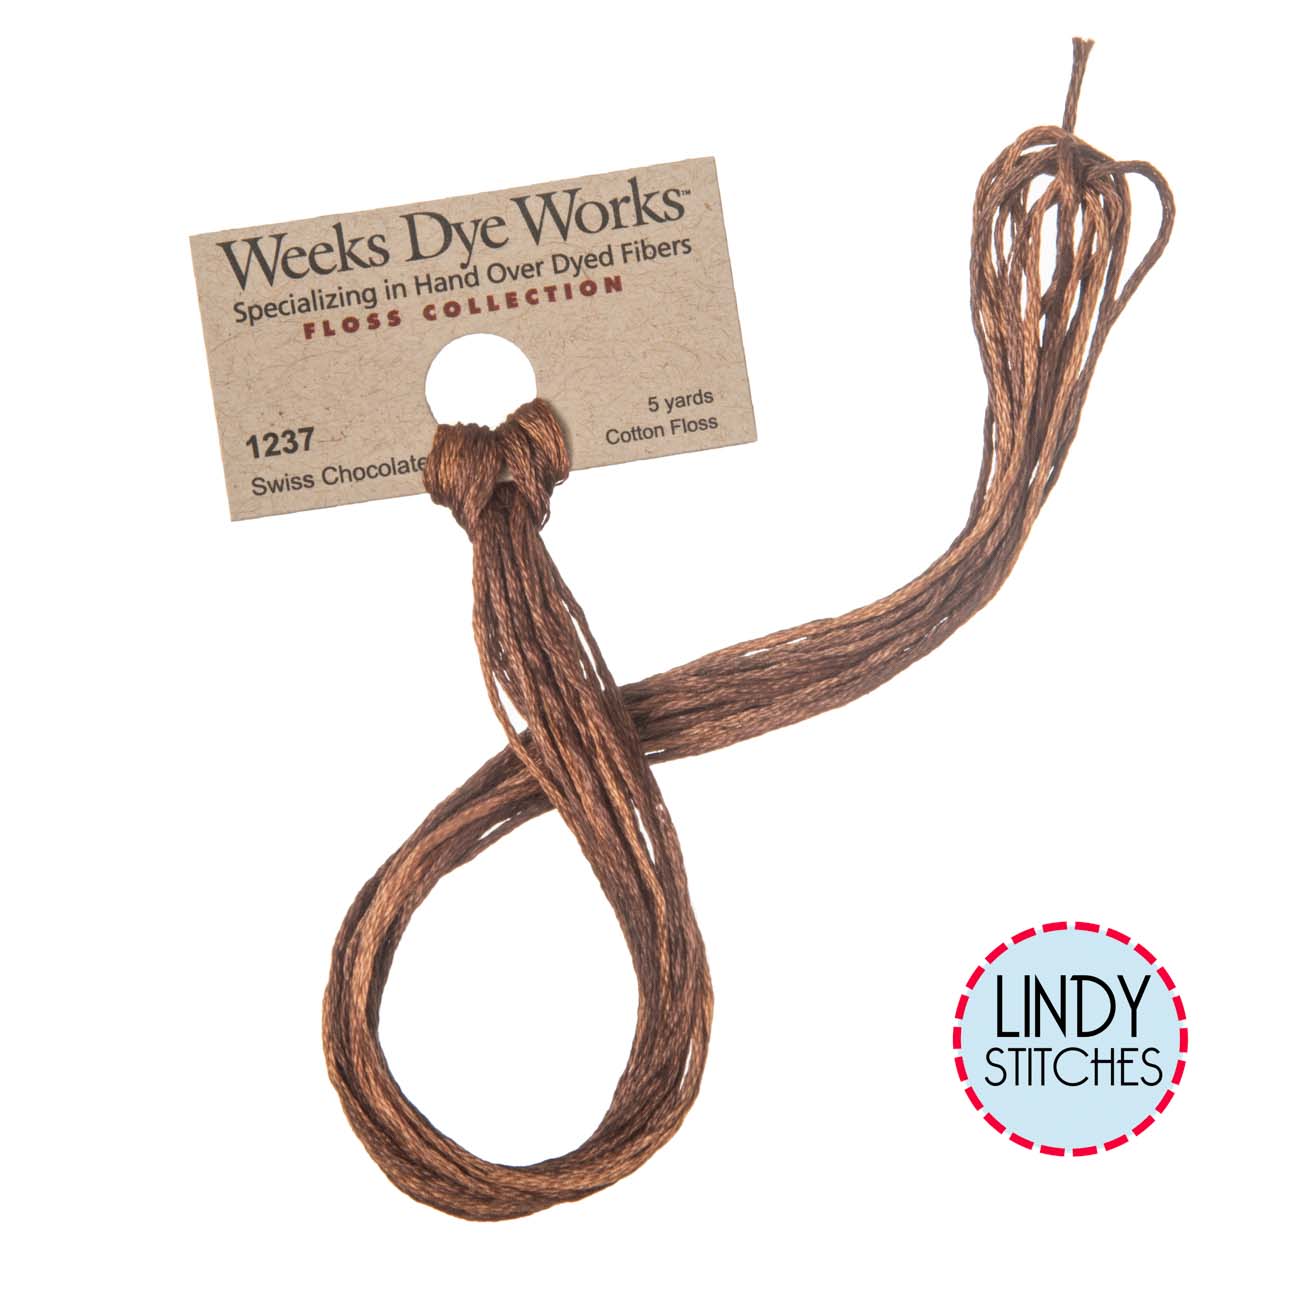 Swiss Chocolate Weeks Dye Works Floss Hand Dyed Cotton Skein 1237